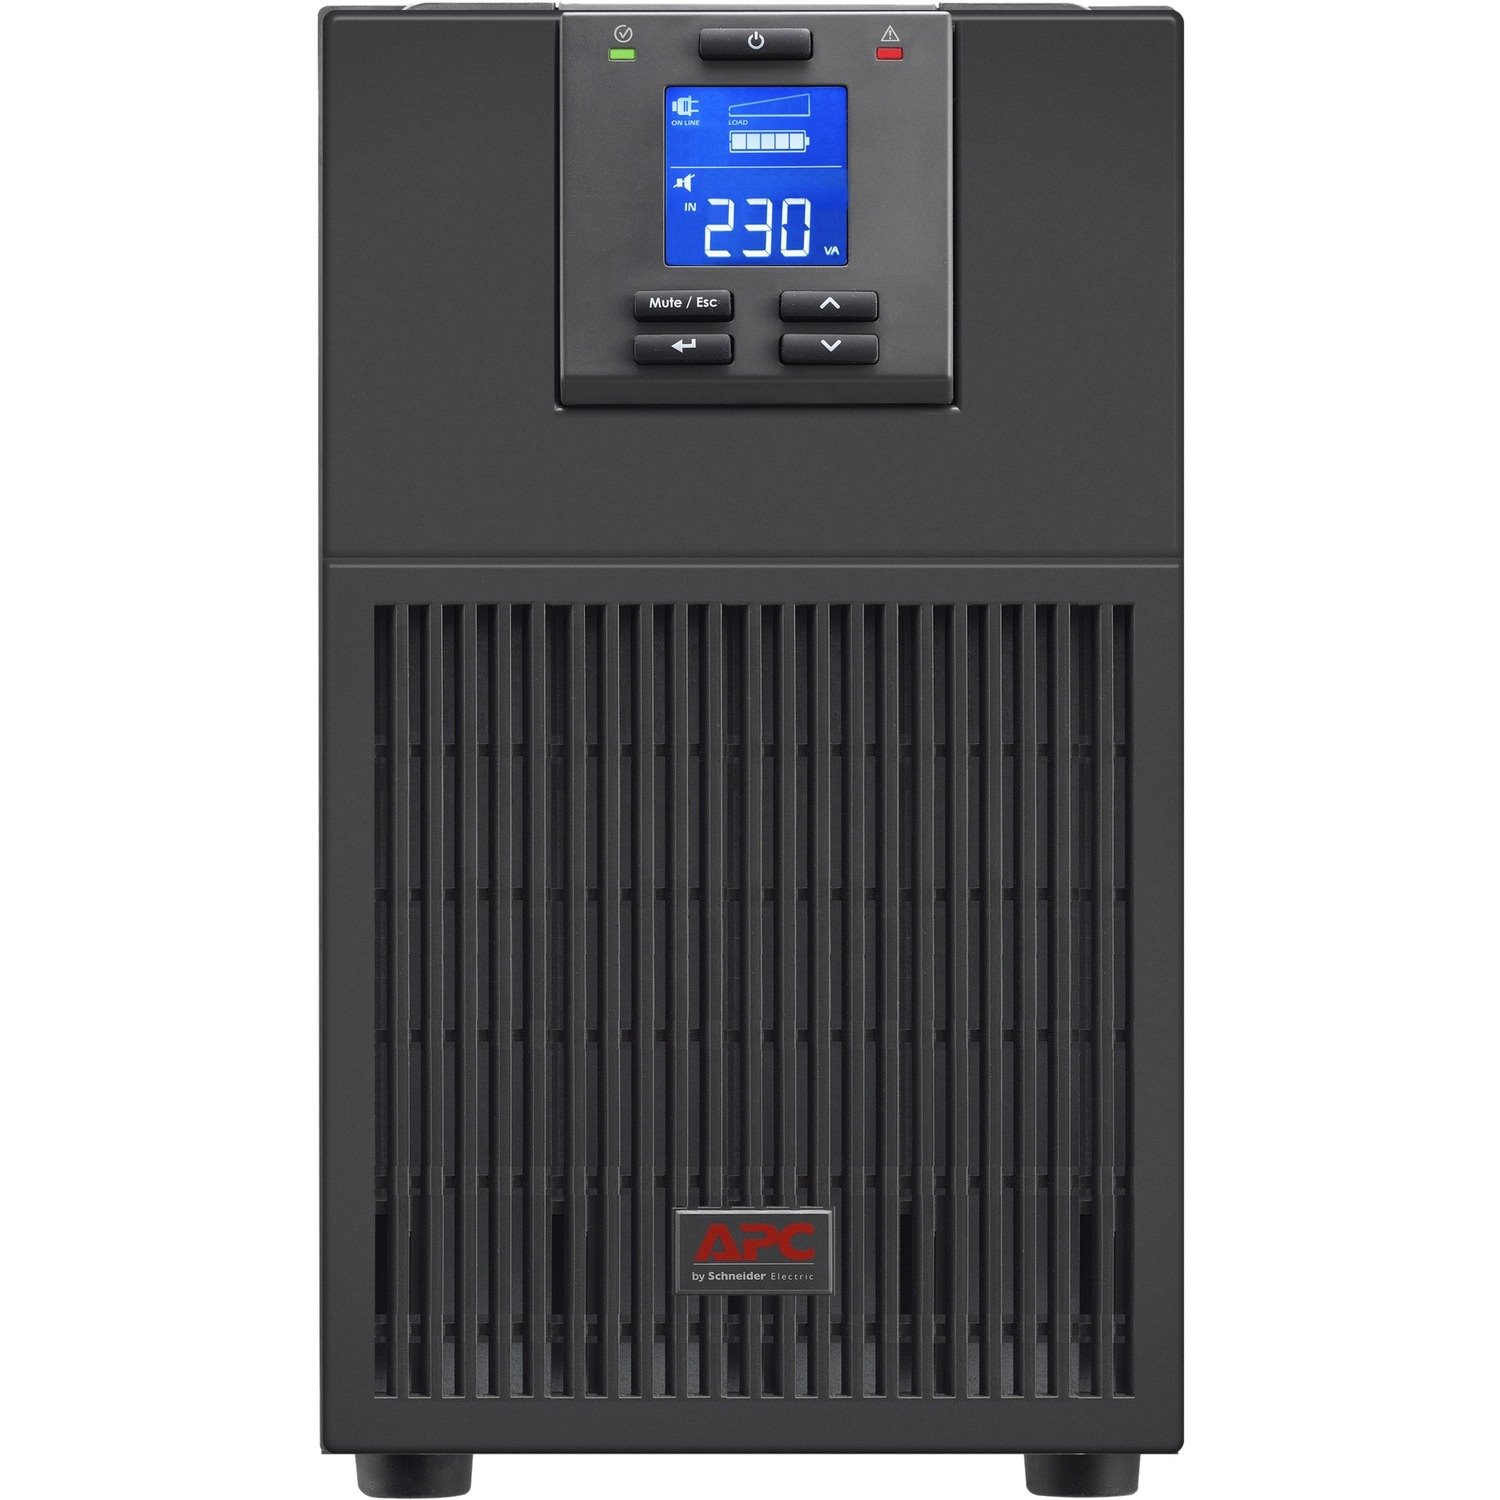 APC by Schneider Electric Easy UPS SRV6KIL Double Conversion Online UPS - 6 kVA/6 kW